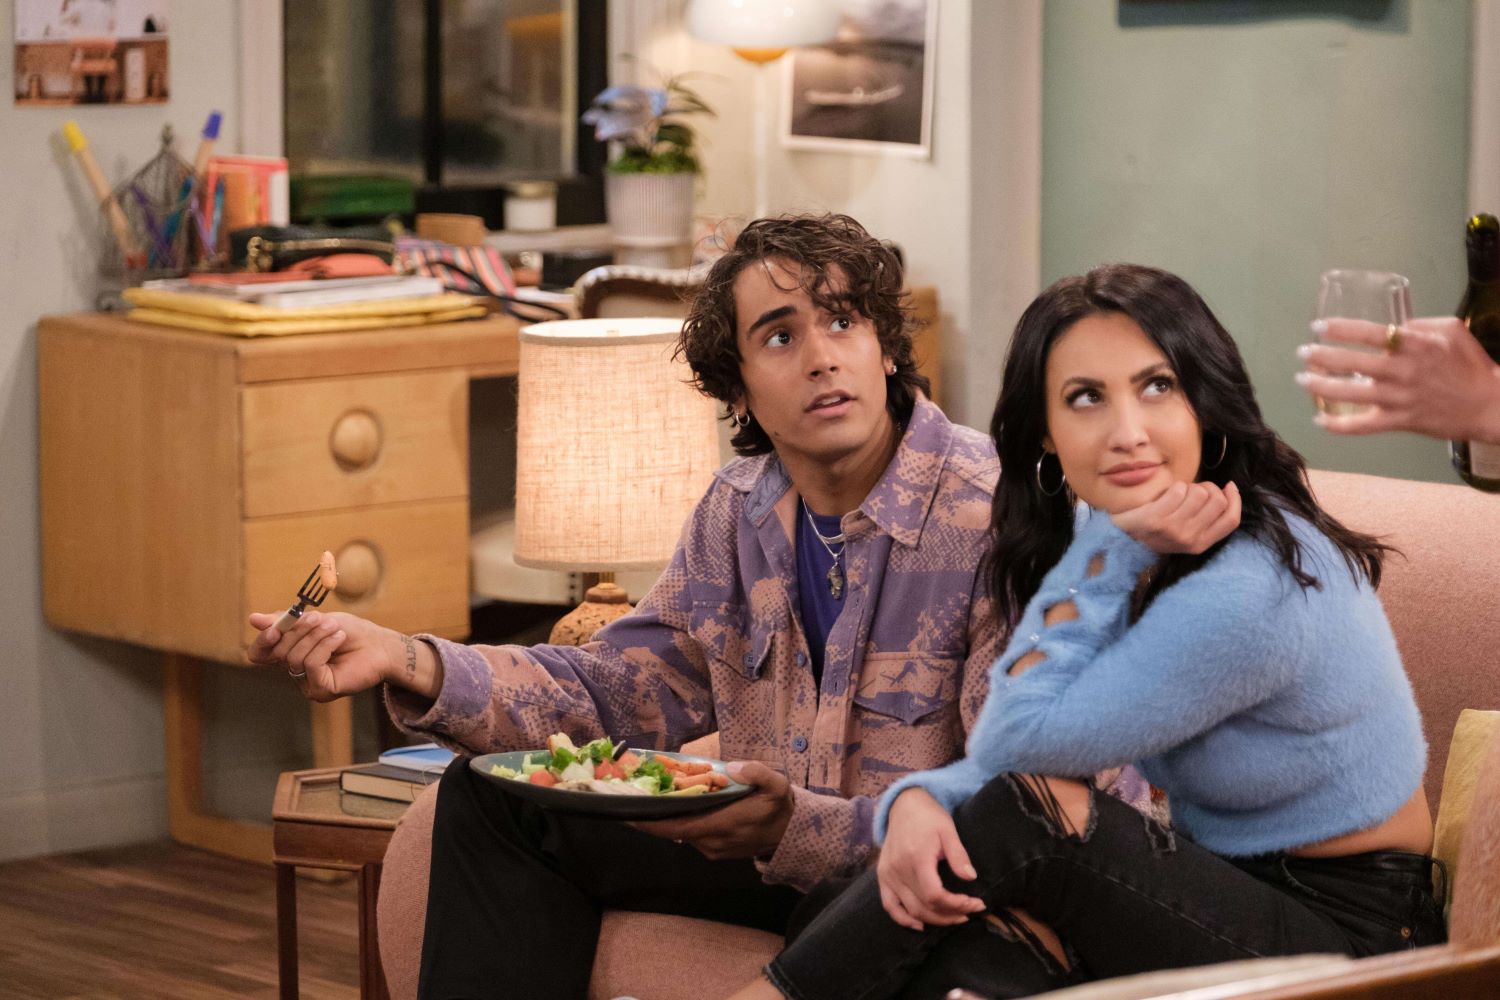 Michael Cimino as Swish and Francia Raisa as Valentina sit on a couch in 'How I Met Your Father' Season 2 Episode 10, 'I'm His Swish.' Swish wears a light purple and orange button-up shirt over a dark purple shirt and black pants. Valentine wears a light blue fuzzy sweater and black ripped jeans.